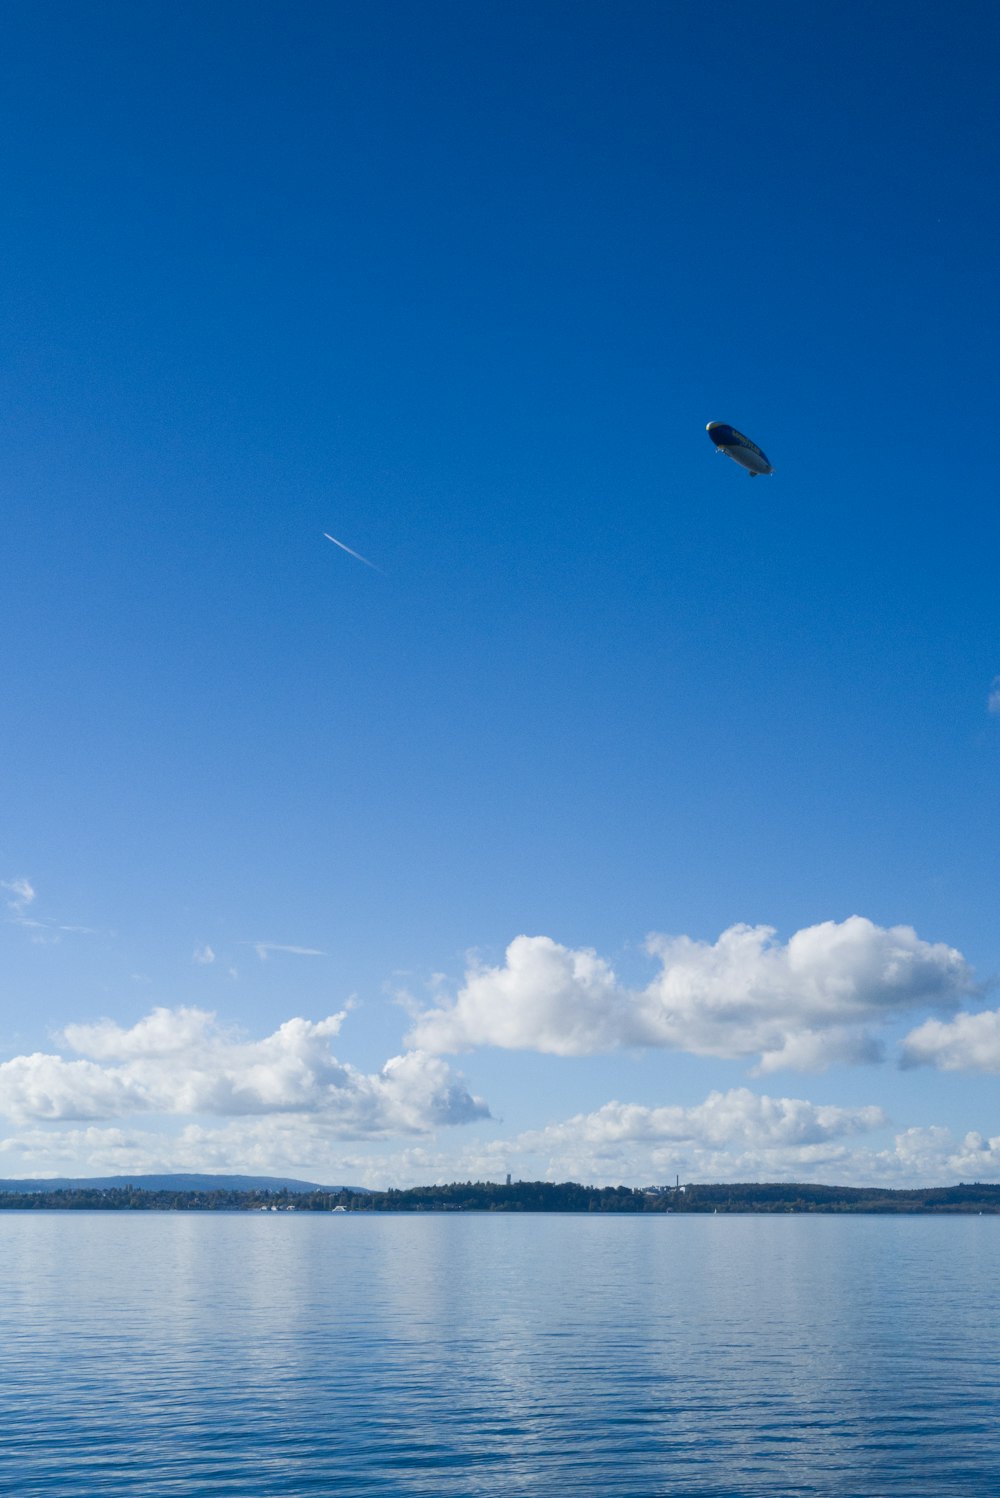 a kite flying over a body of water